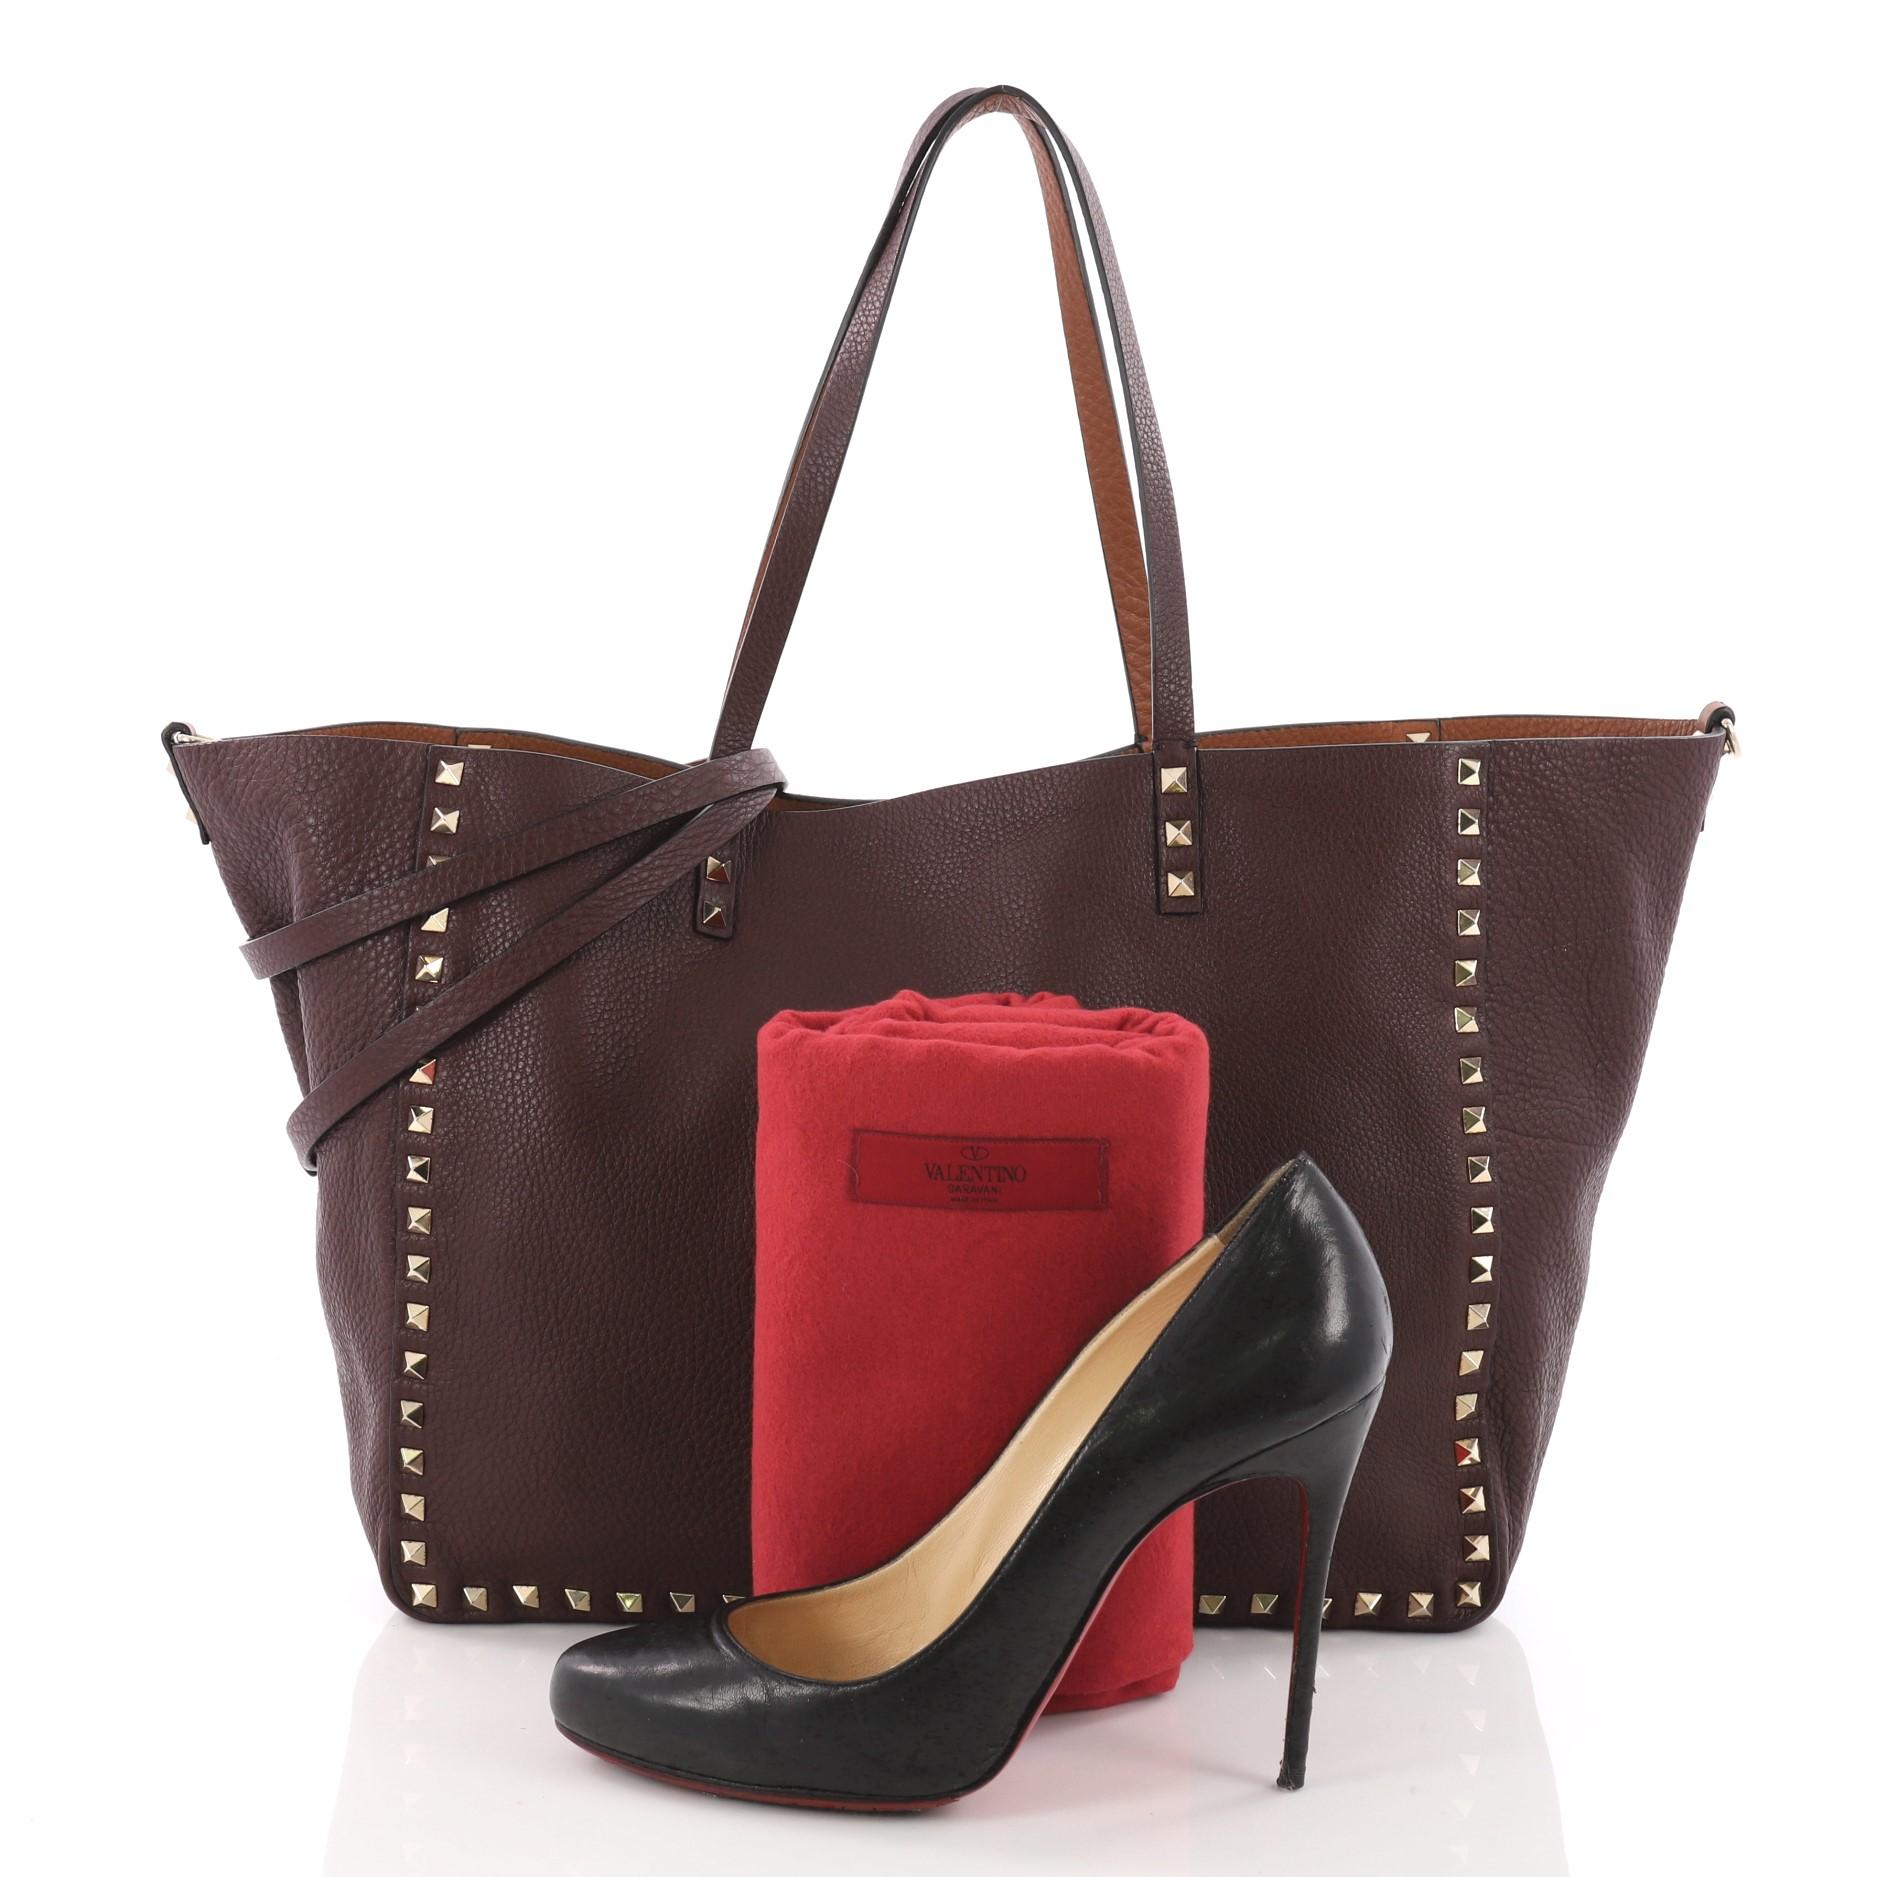 This authentic Valentino Rockstud Reversible Convertible Tote Leather Medium is a perfect daily bag for any on-the-go fashionista. Crafted from burgundy and brown reversible leather, this tote features the brand's iconic pyramid rockstud detailing,